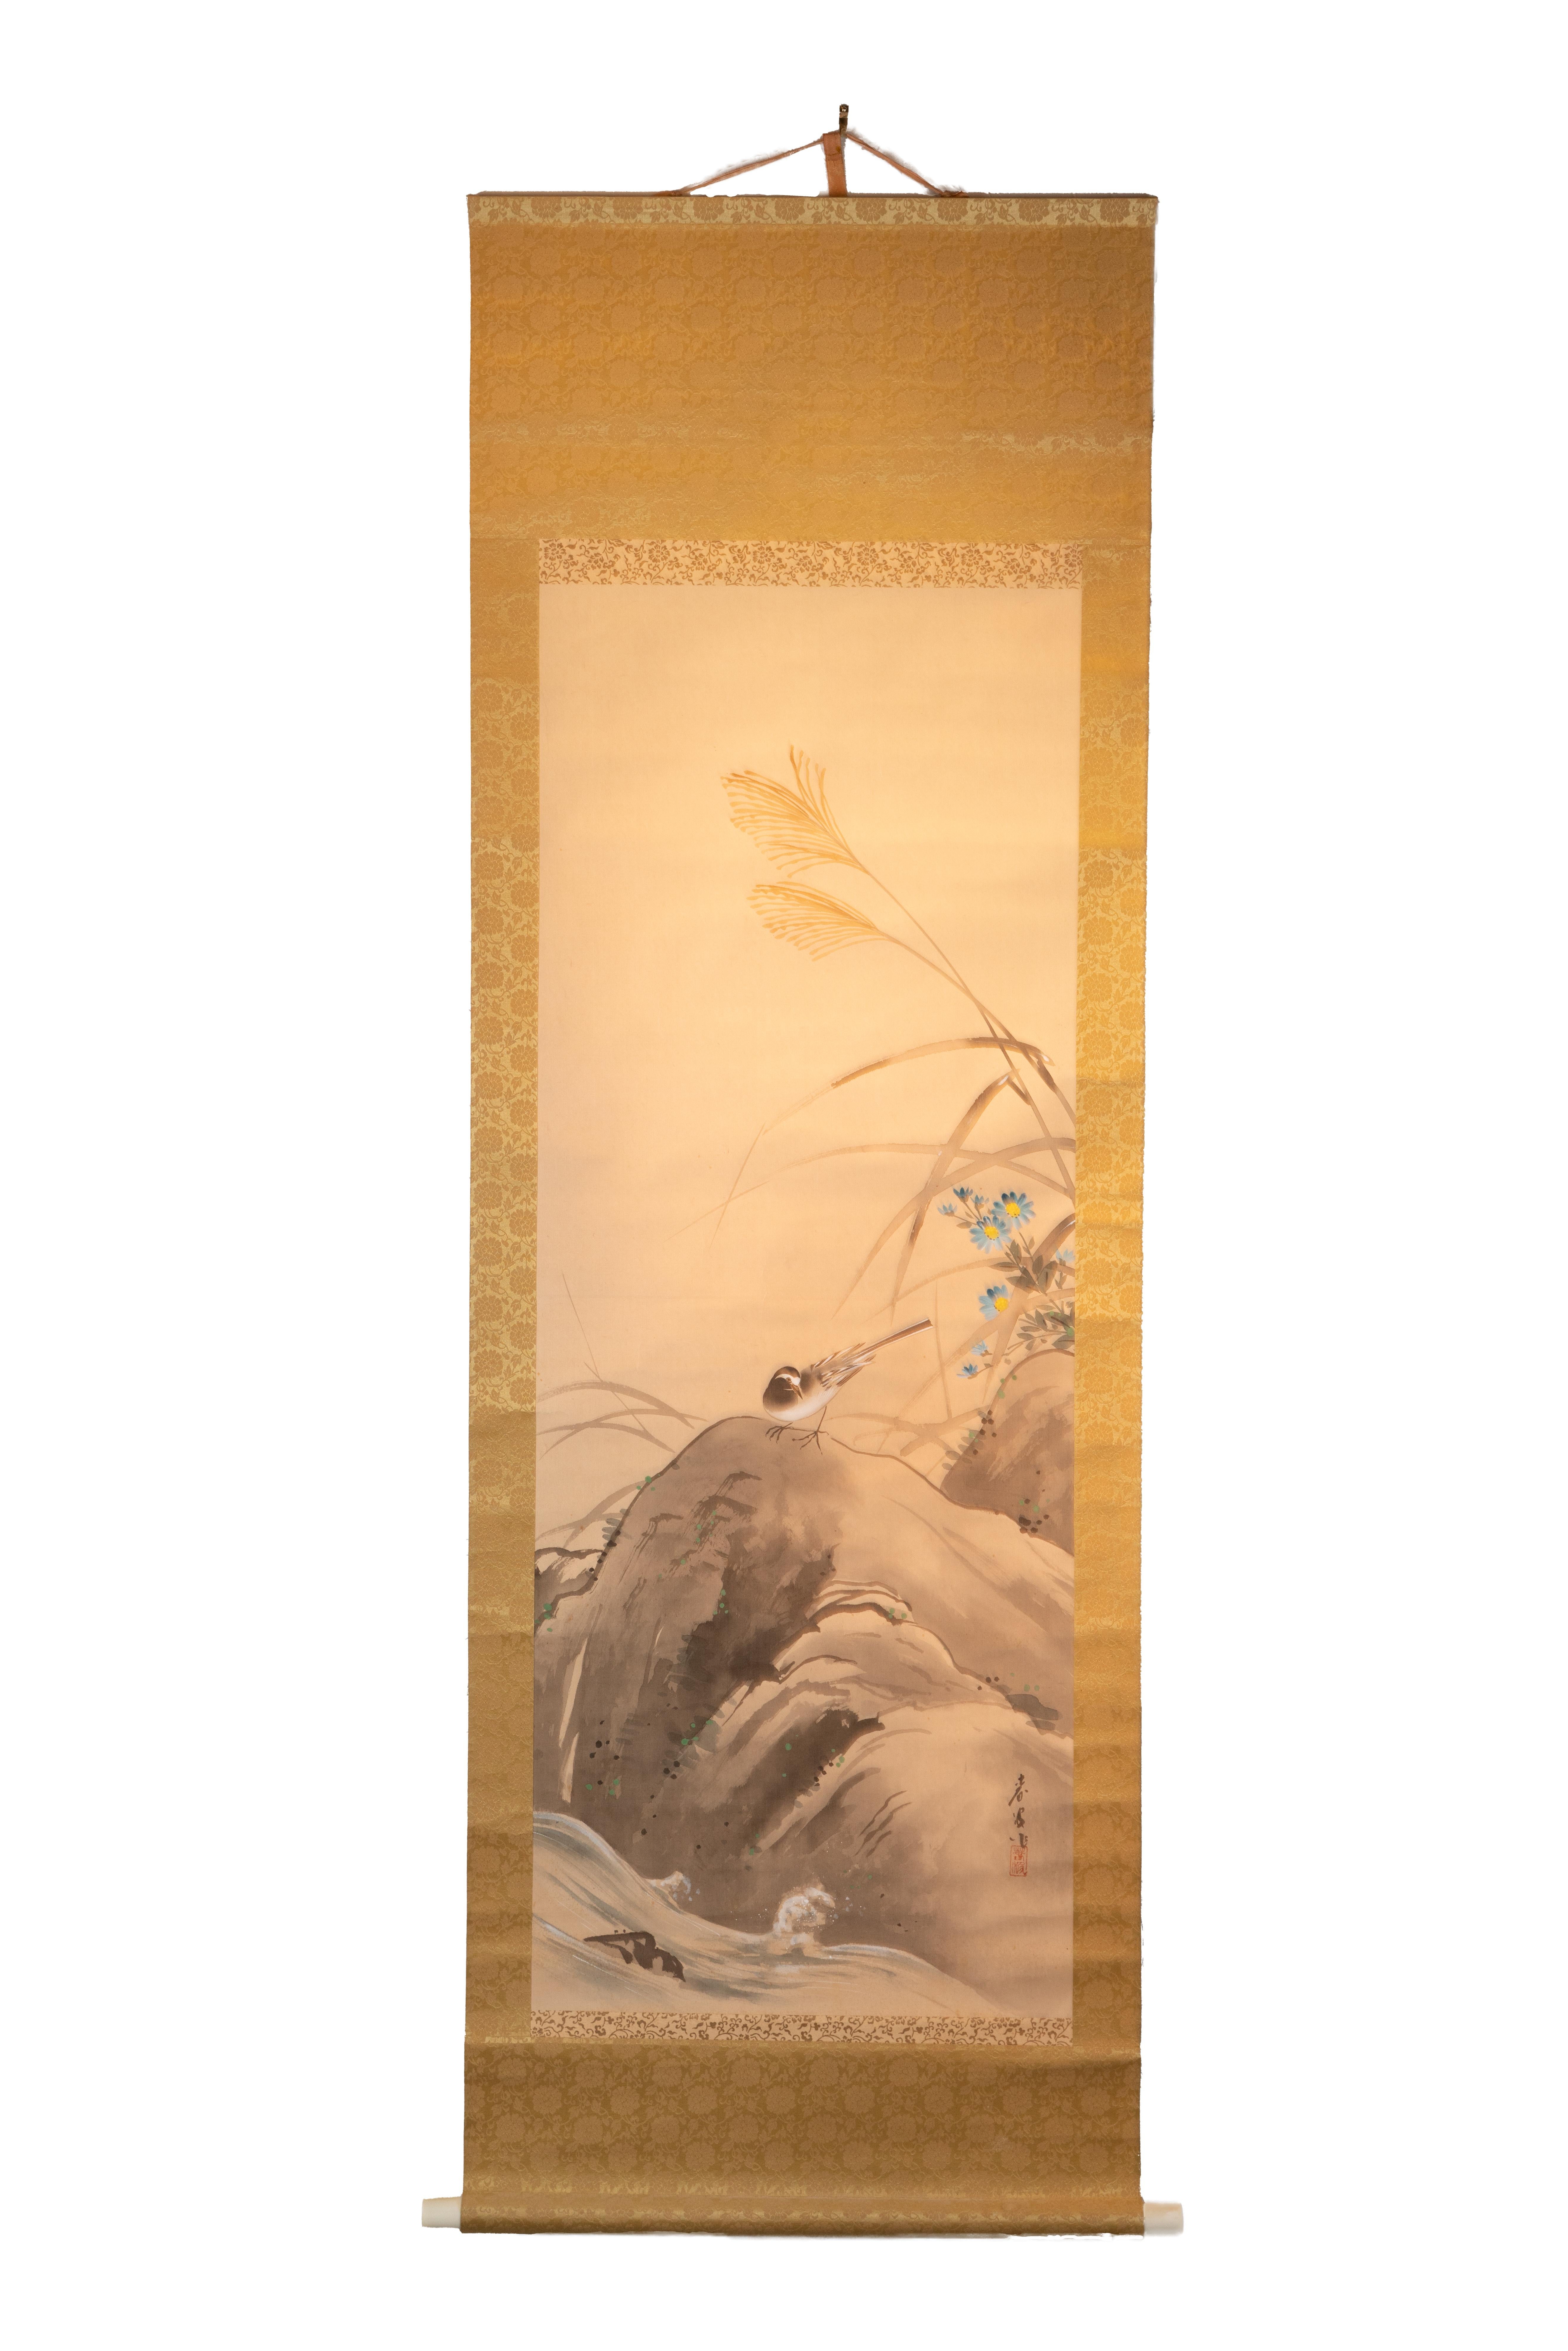 This 59" x 20" Chinese Antique Scroll depicts a simple yet serene scene of a bird on a rock. The bird stands on the rock, which is much larger in size in comparison to the bird. The bird' s body is facing the viewer but is slightly turned towards